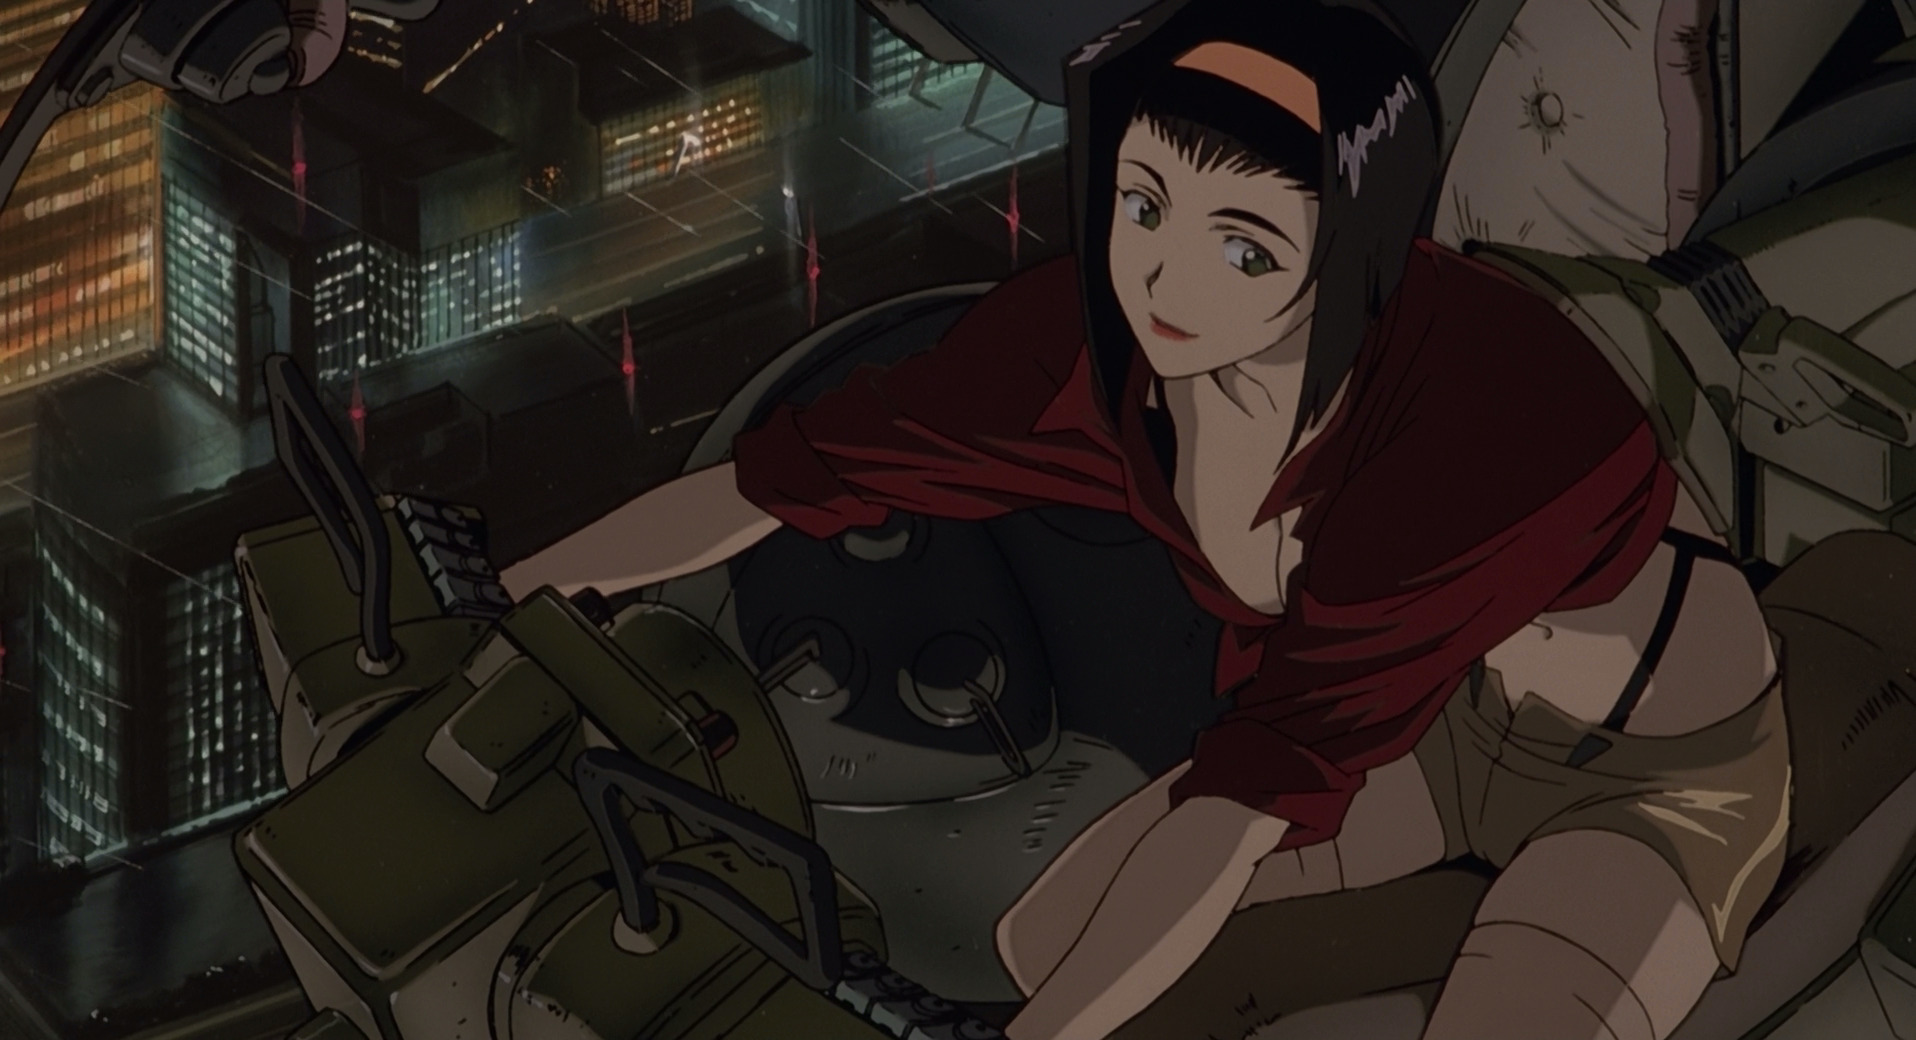 Cowboy Bebop: Faye Valentine’s Outfit Will Be Changed For Netflix Series — And Fans Are Outraged